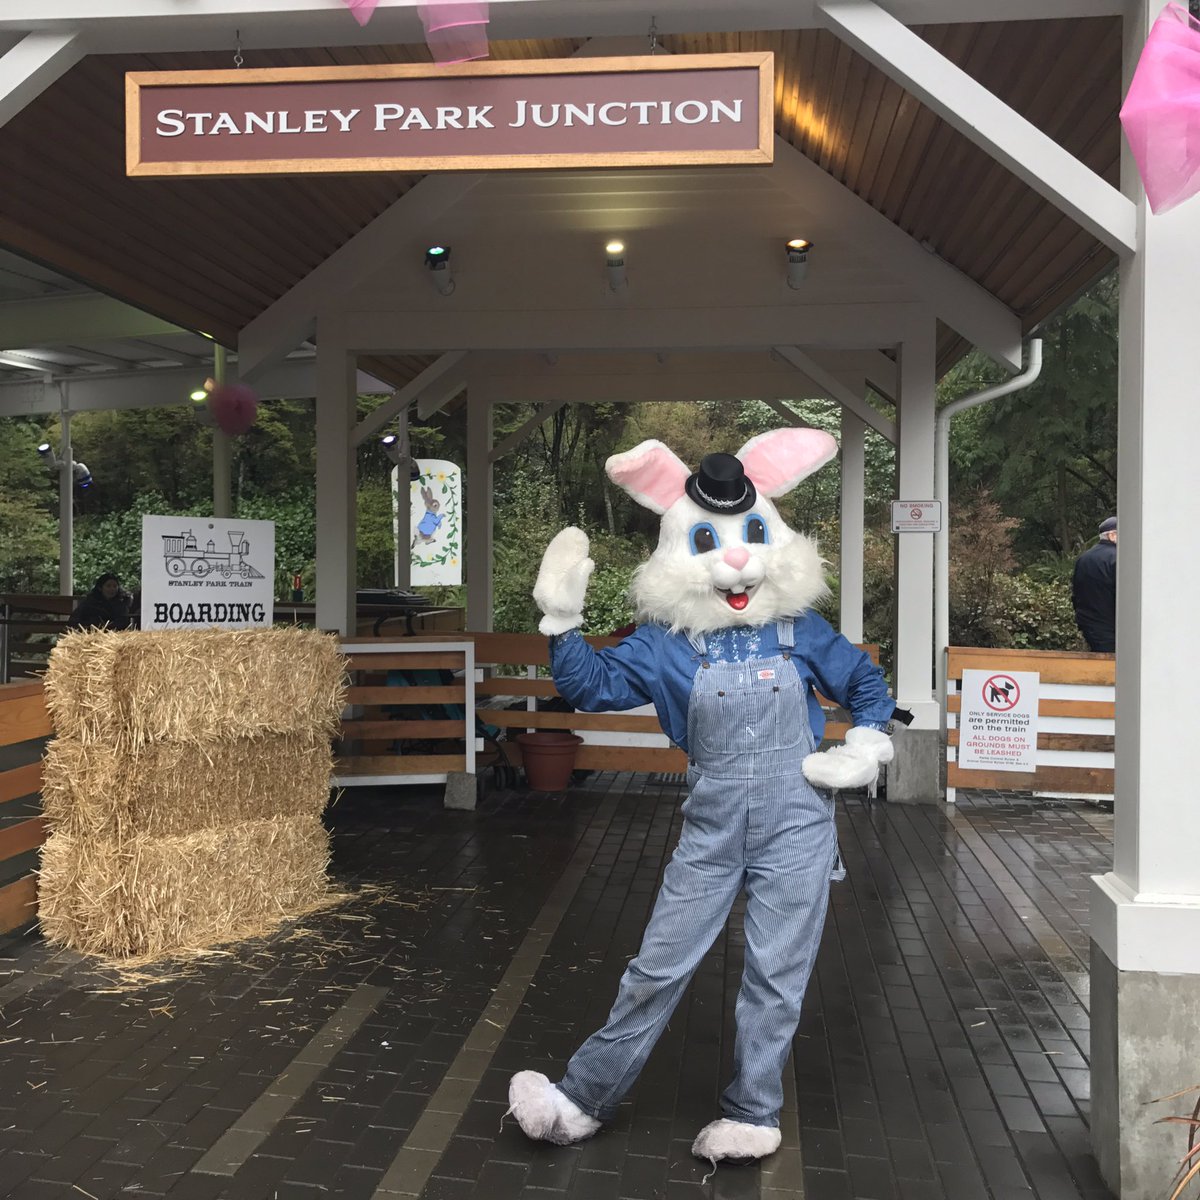 Easter Bunny in Stanley Park, Vancouver, BC, Canada